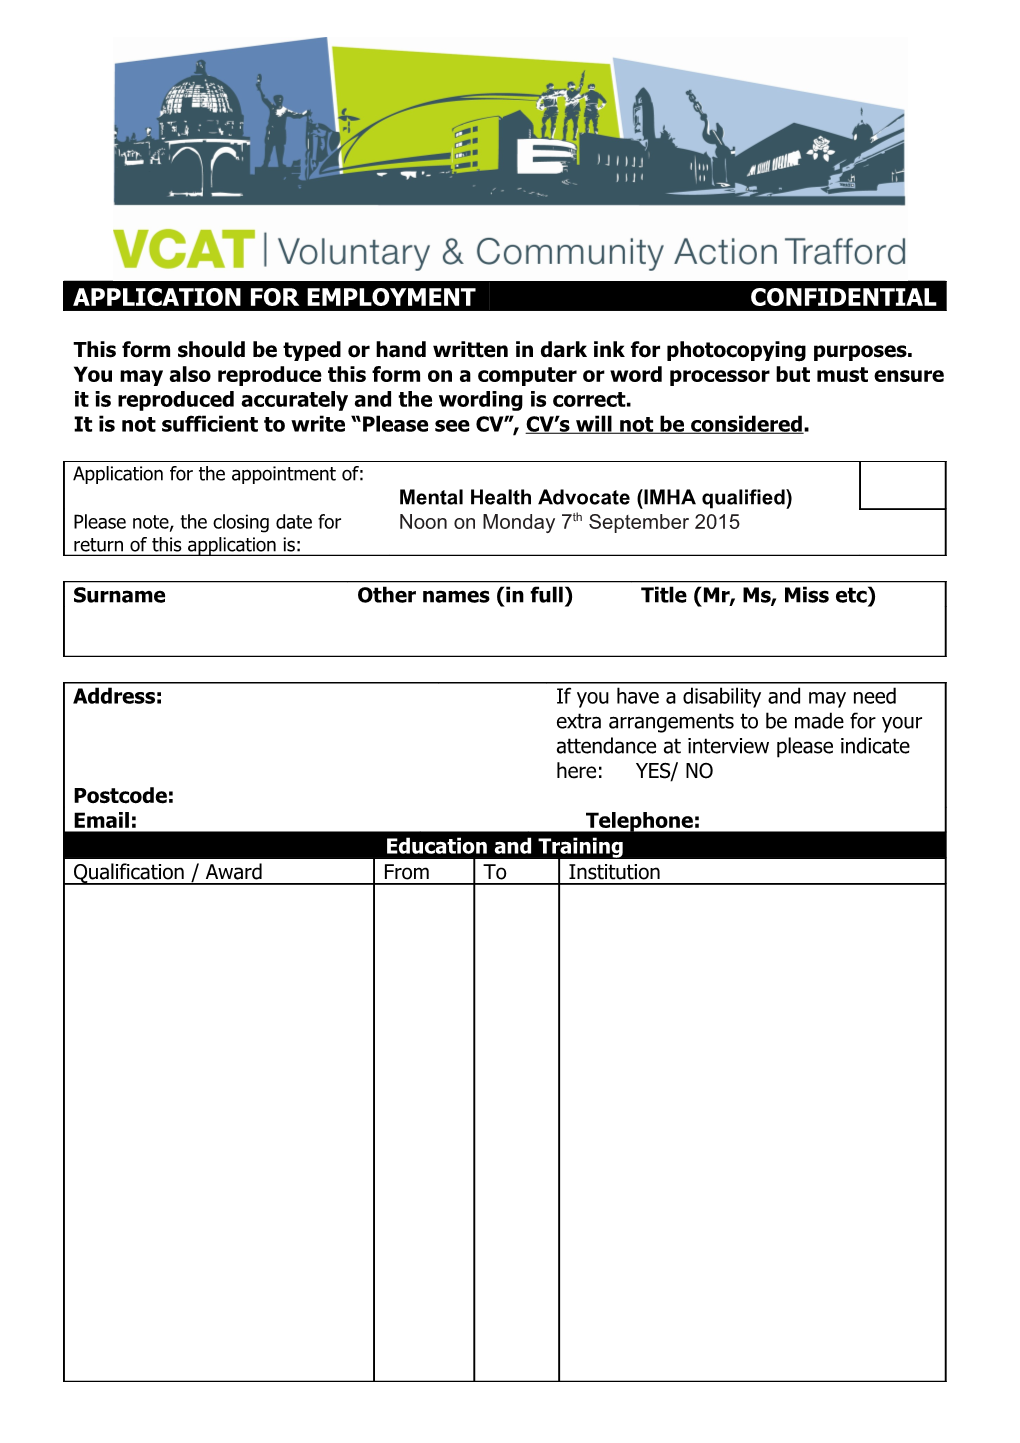 This Form Should Be Typed Or Hand Written in Dark Ink for Photocopying Purposes